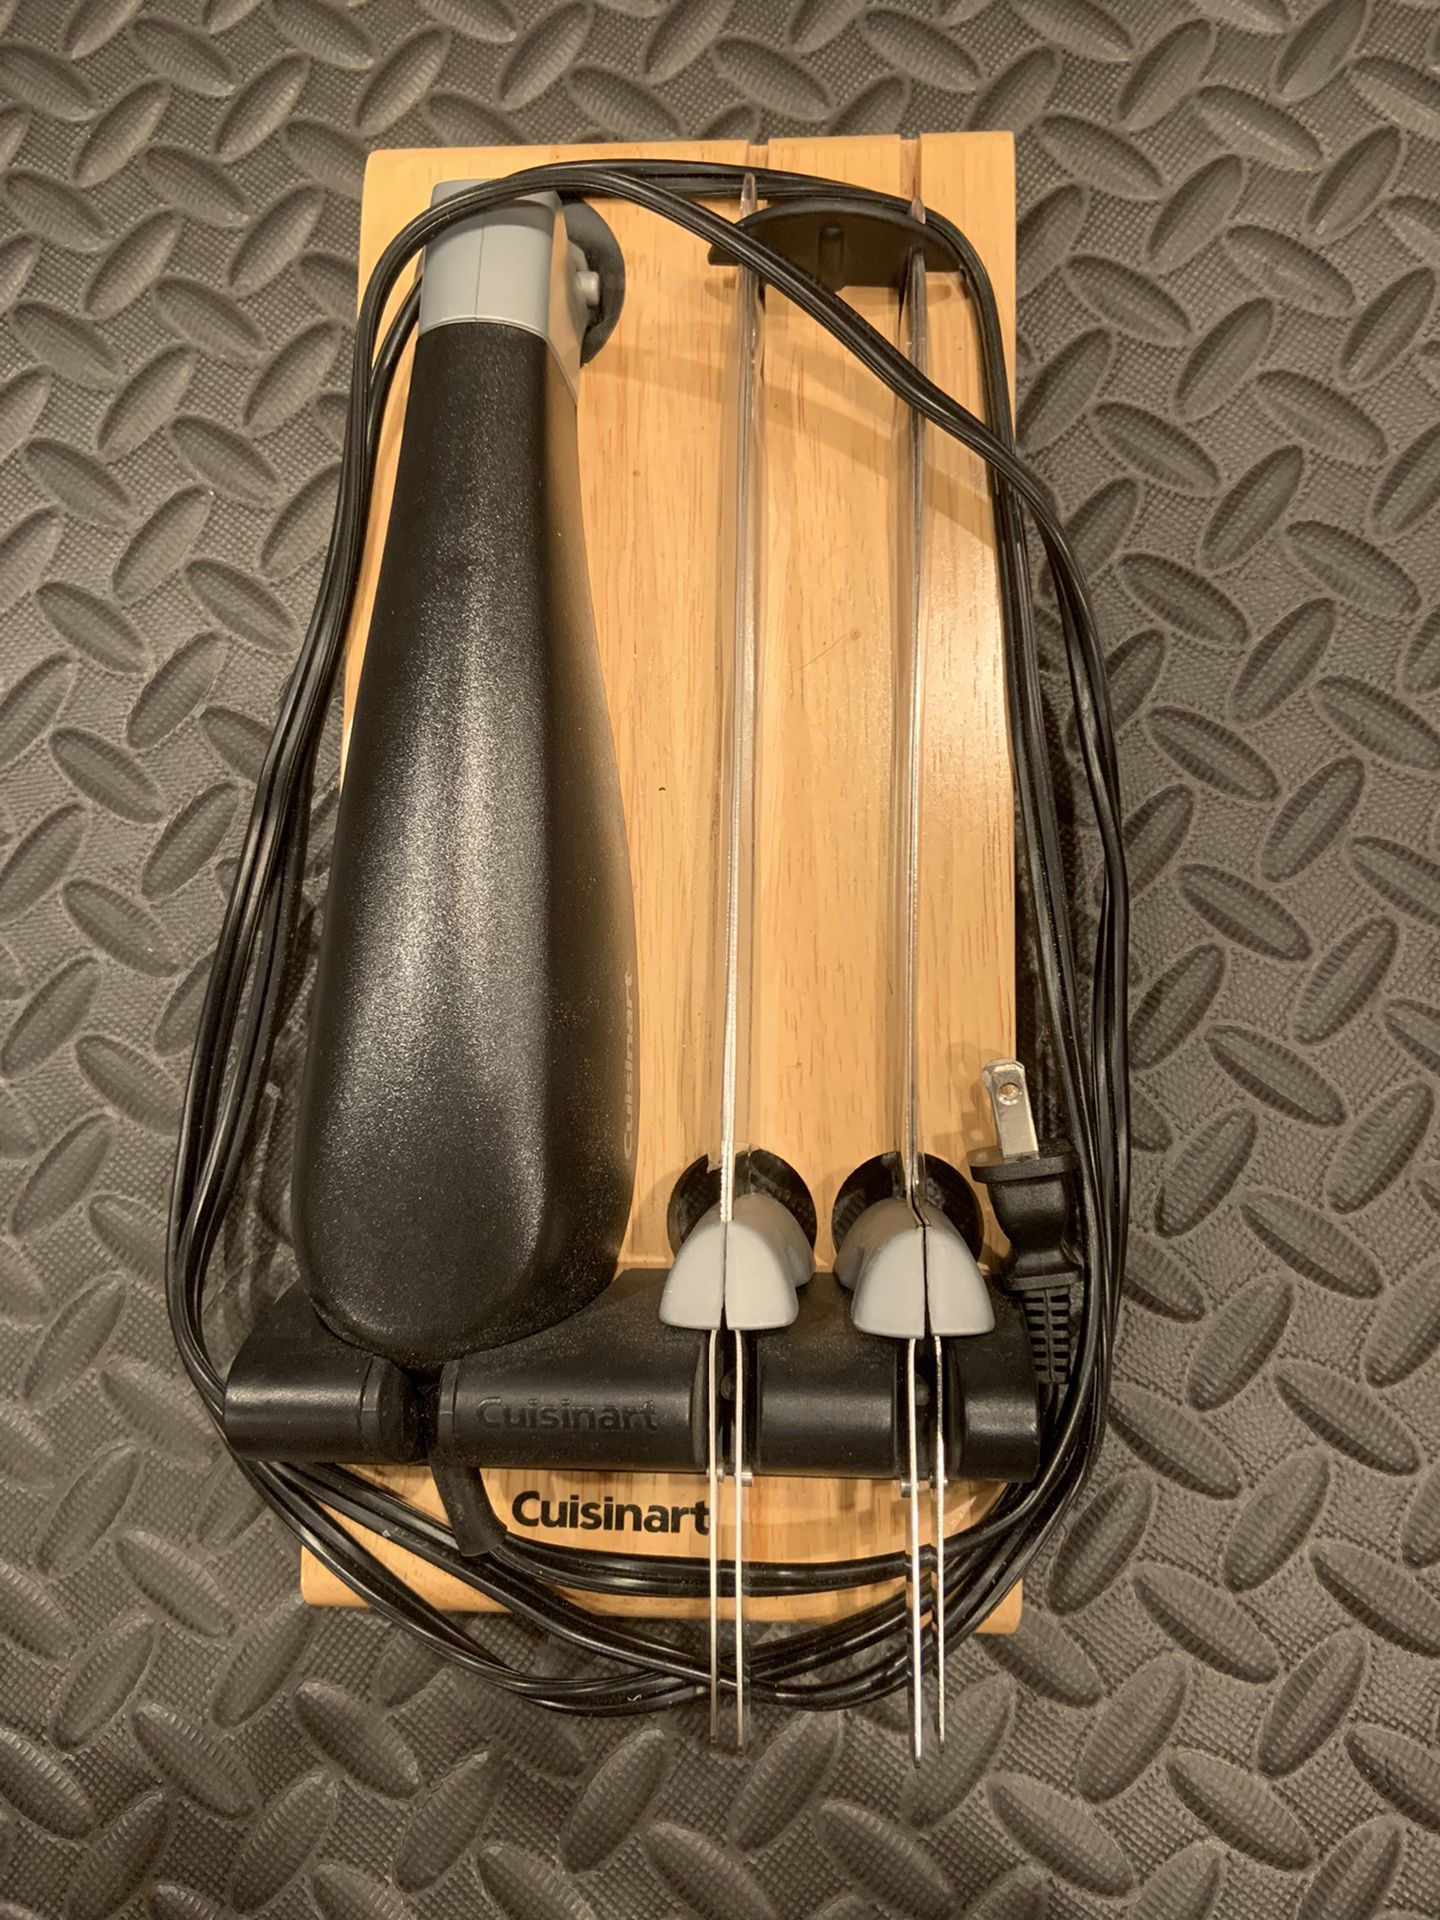 Cuisinart electric carving knife